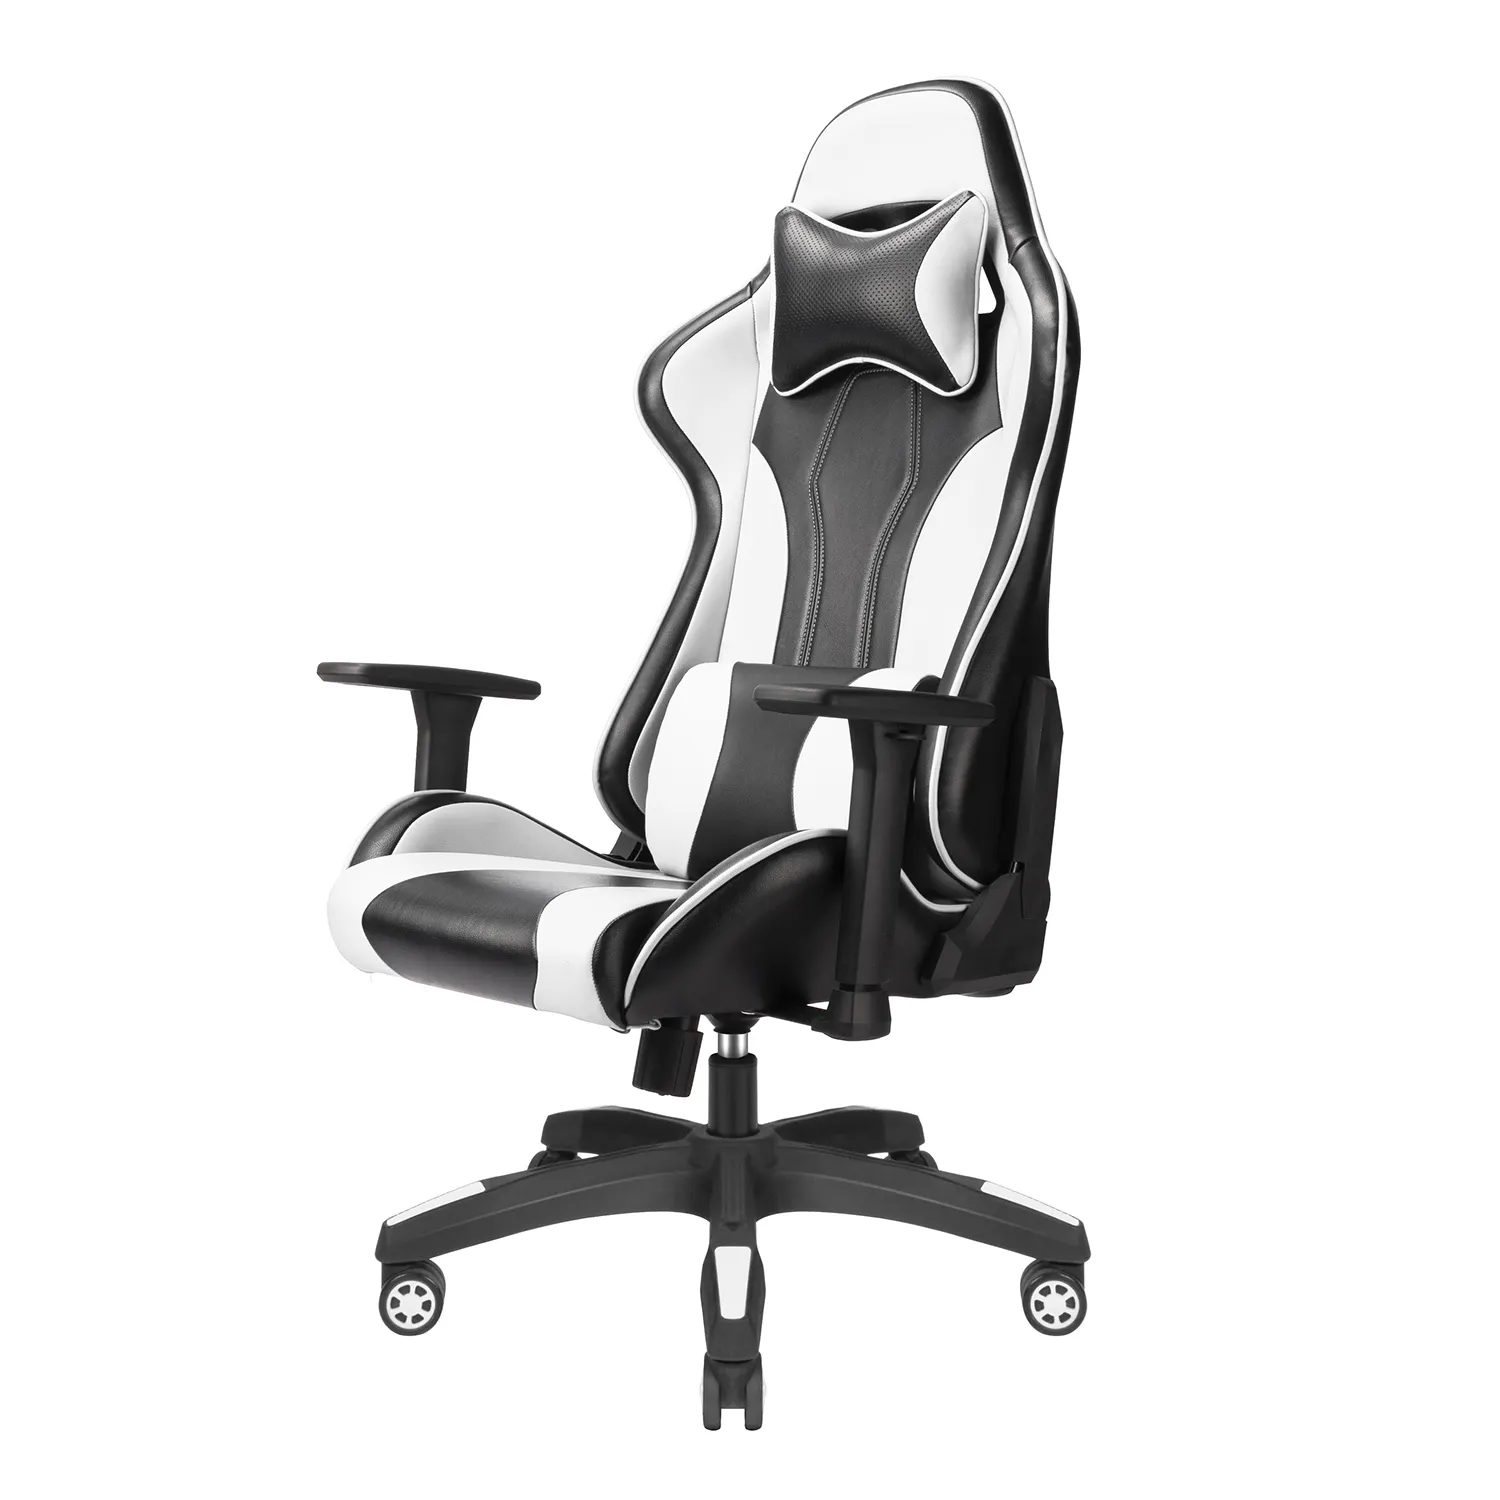 OEM Gaming chair Manufactory direct sale computer gaming lift chair